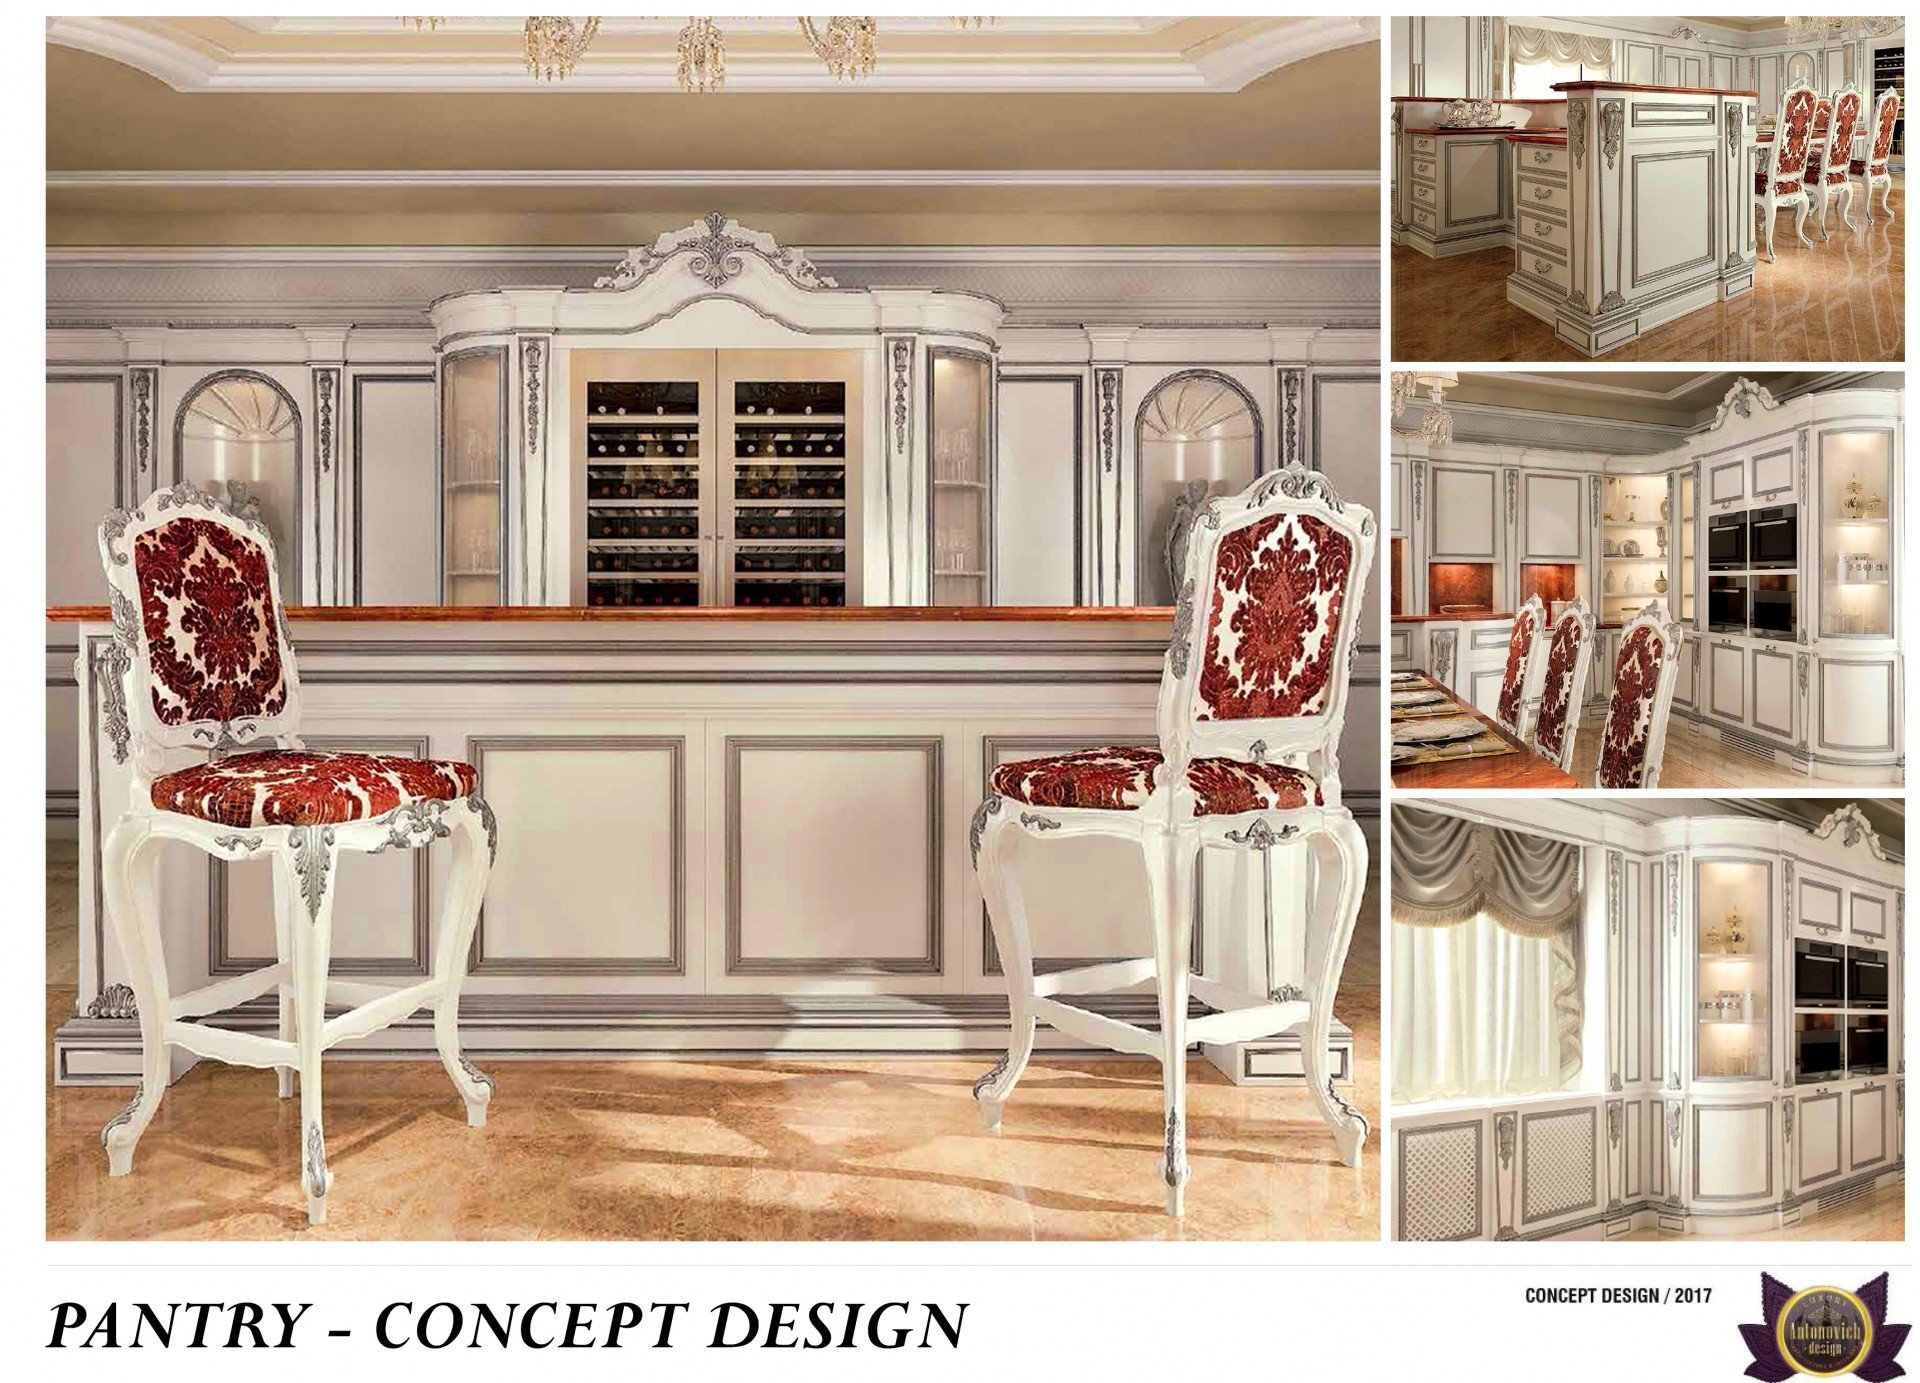 Kitchen design and manufacturing services in Pakistan